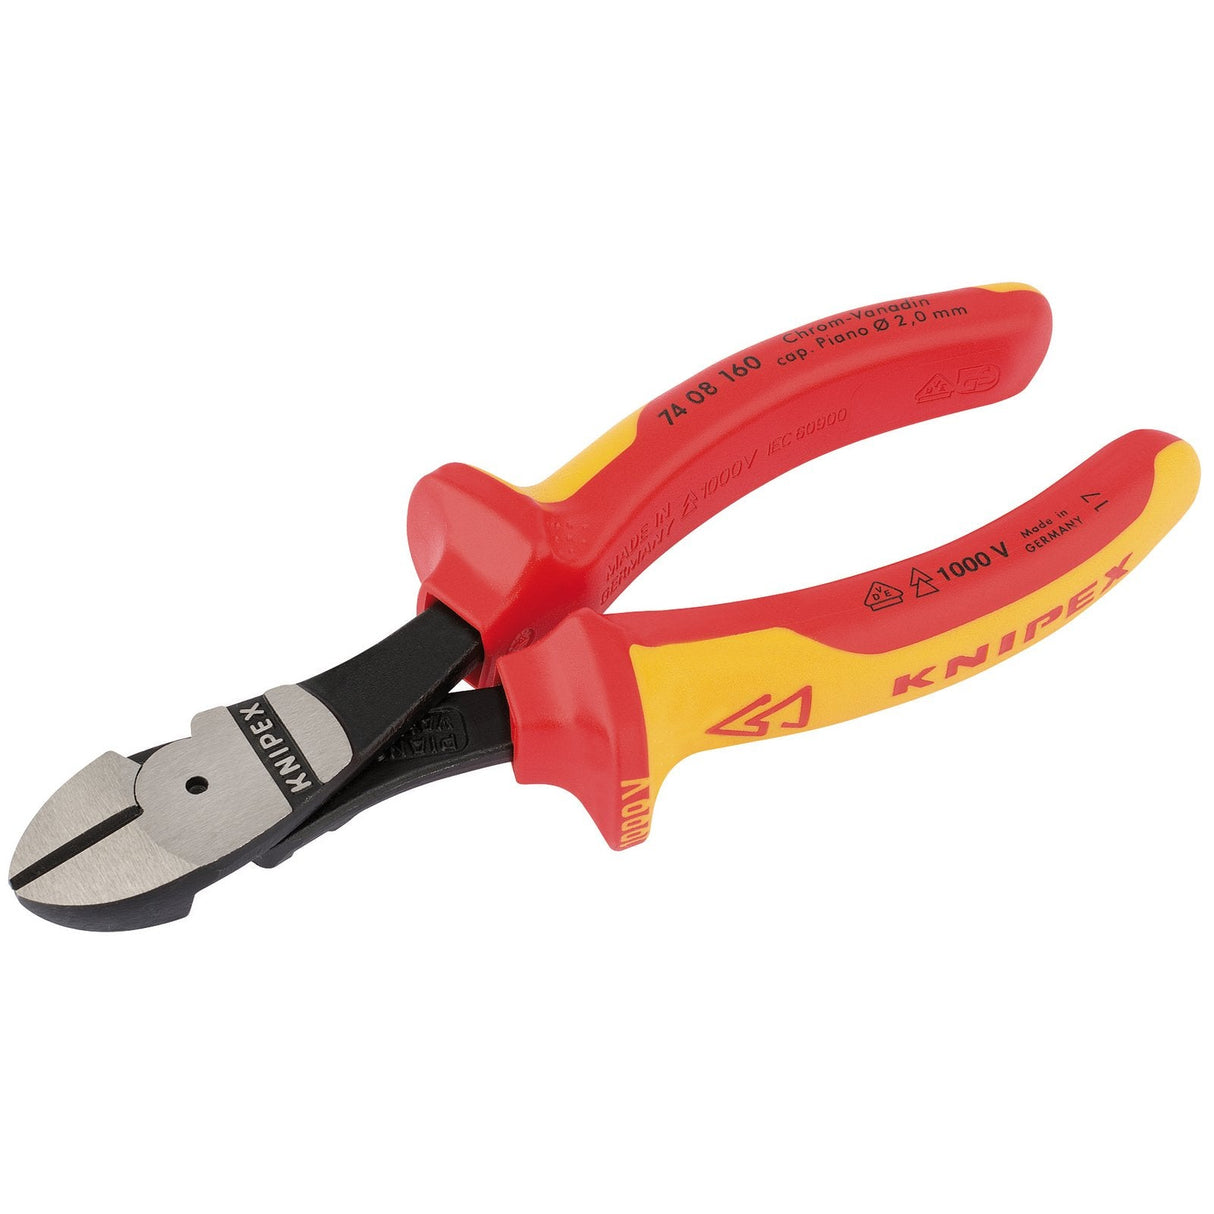 Draper Knipex 74 08 160Uksbe Vde Fully Insulated High Leverage Diagonal Side Cutters, 160mm - 74 08 160 UKSBE - Farming Parts